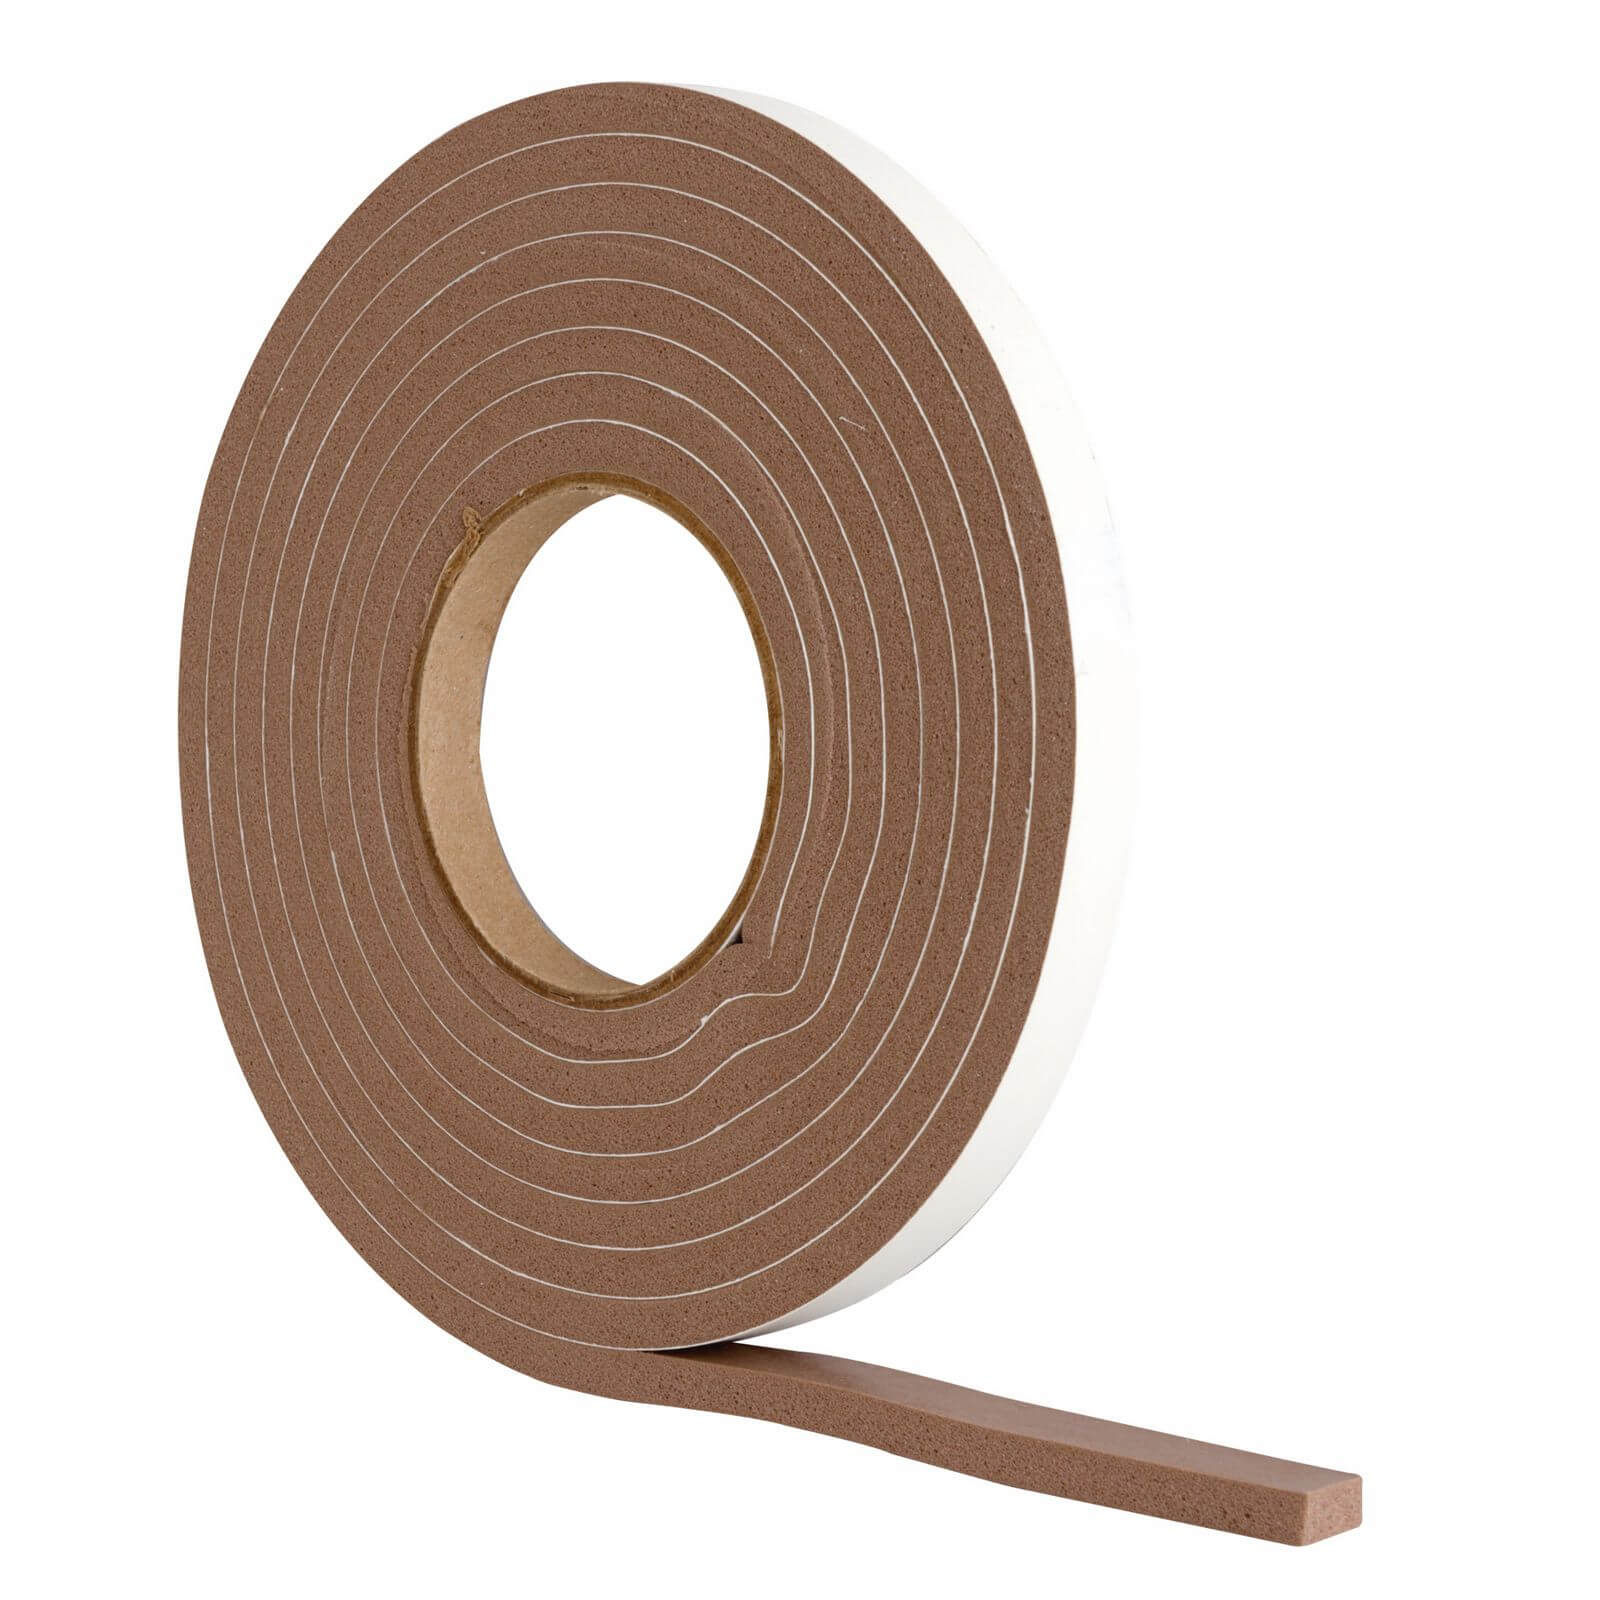 Stormguard Extra Thick Foam Seal Brown - 3.5m